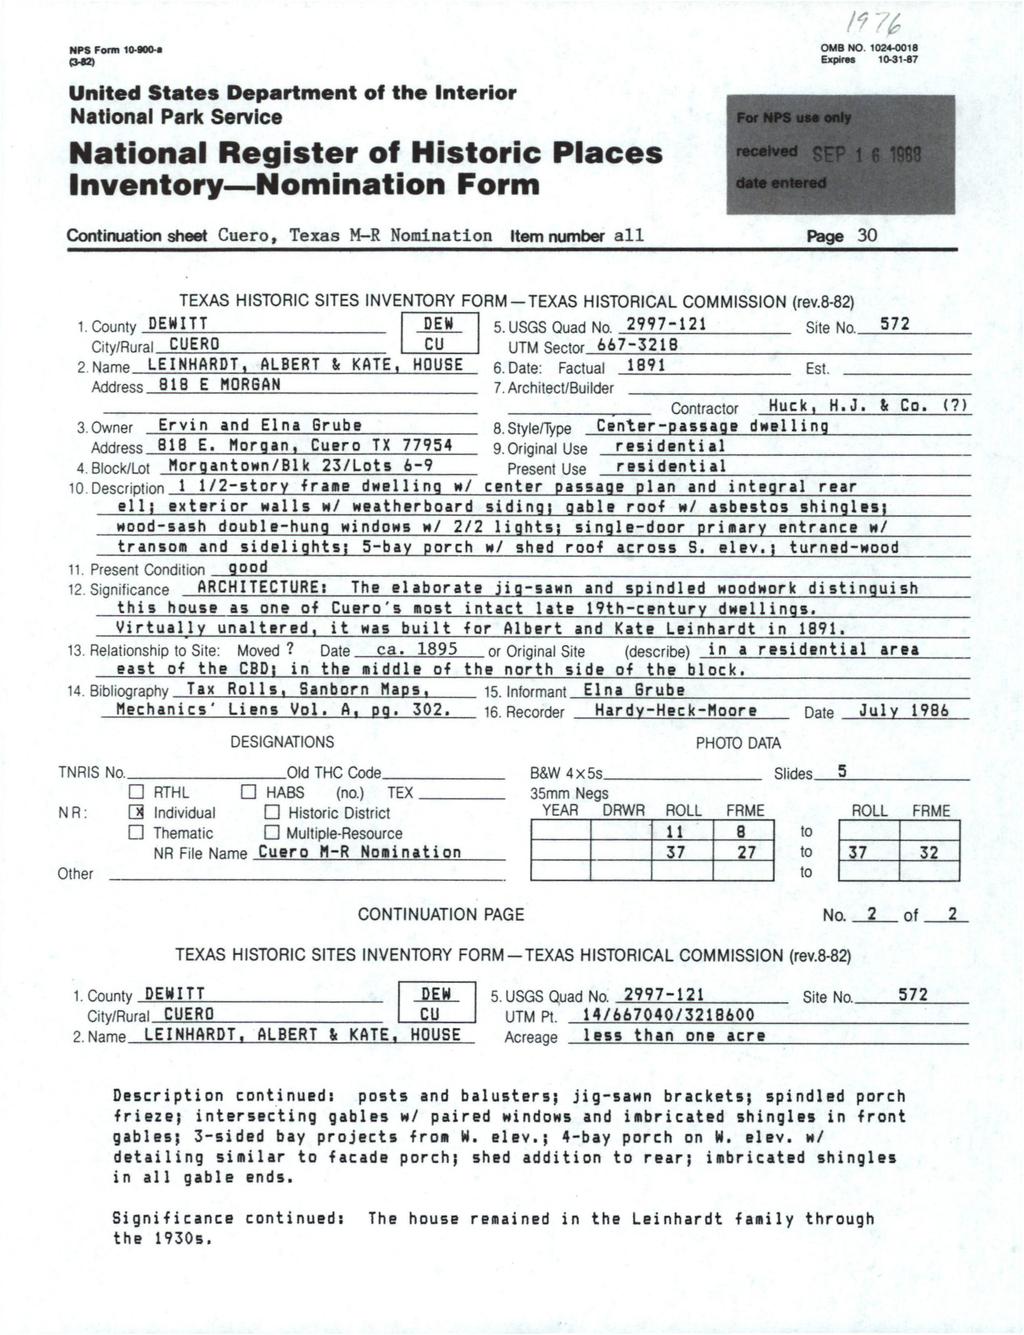 HPS Form 10-»00.«(HO) United States Department of the Interior National Parte Service National Register off Historic Piaces Inventory Nomination Form NPS UM received date entered OMB NO.